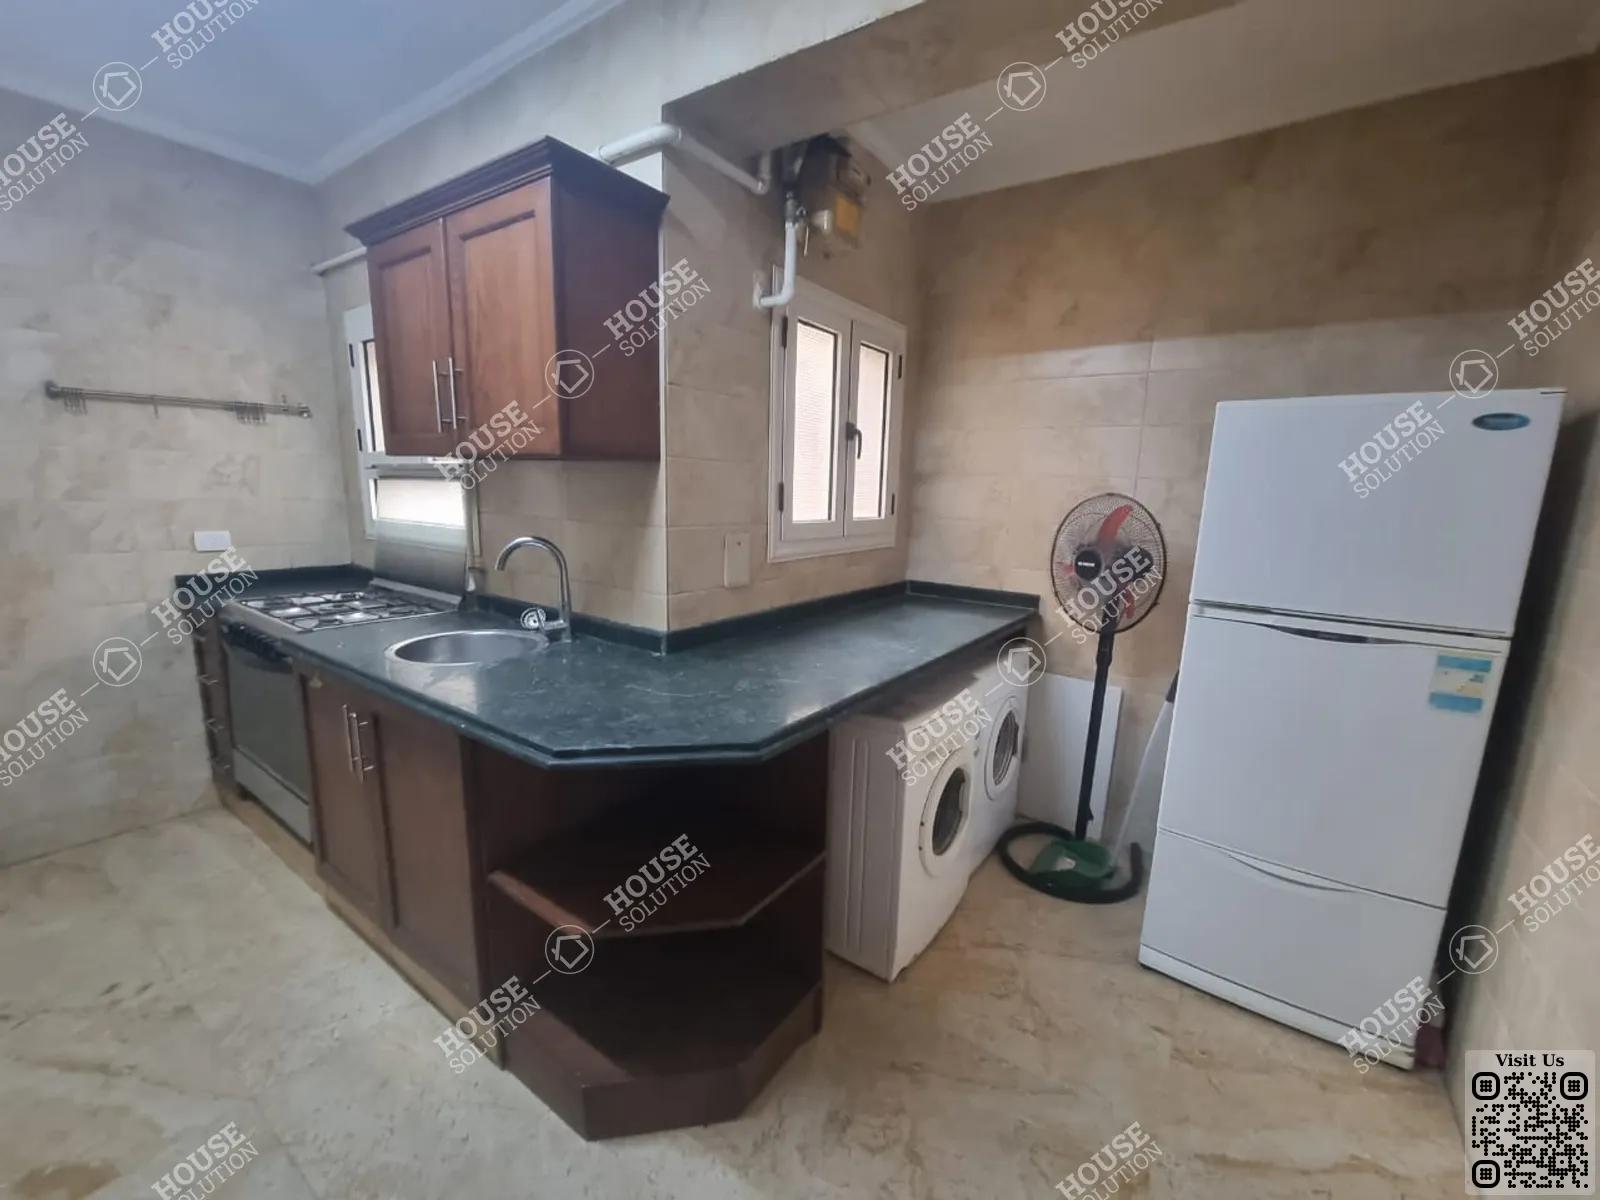 KITCHEN  @ Apartments For Rent In Maadi Maadi Degla Area: 150 m² consists of 2 Bedrooms 2 Bathrooms Modern furnished 5 stars #4977-1